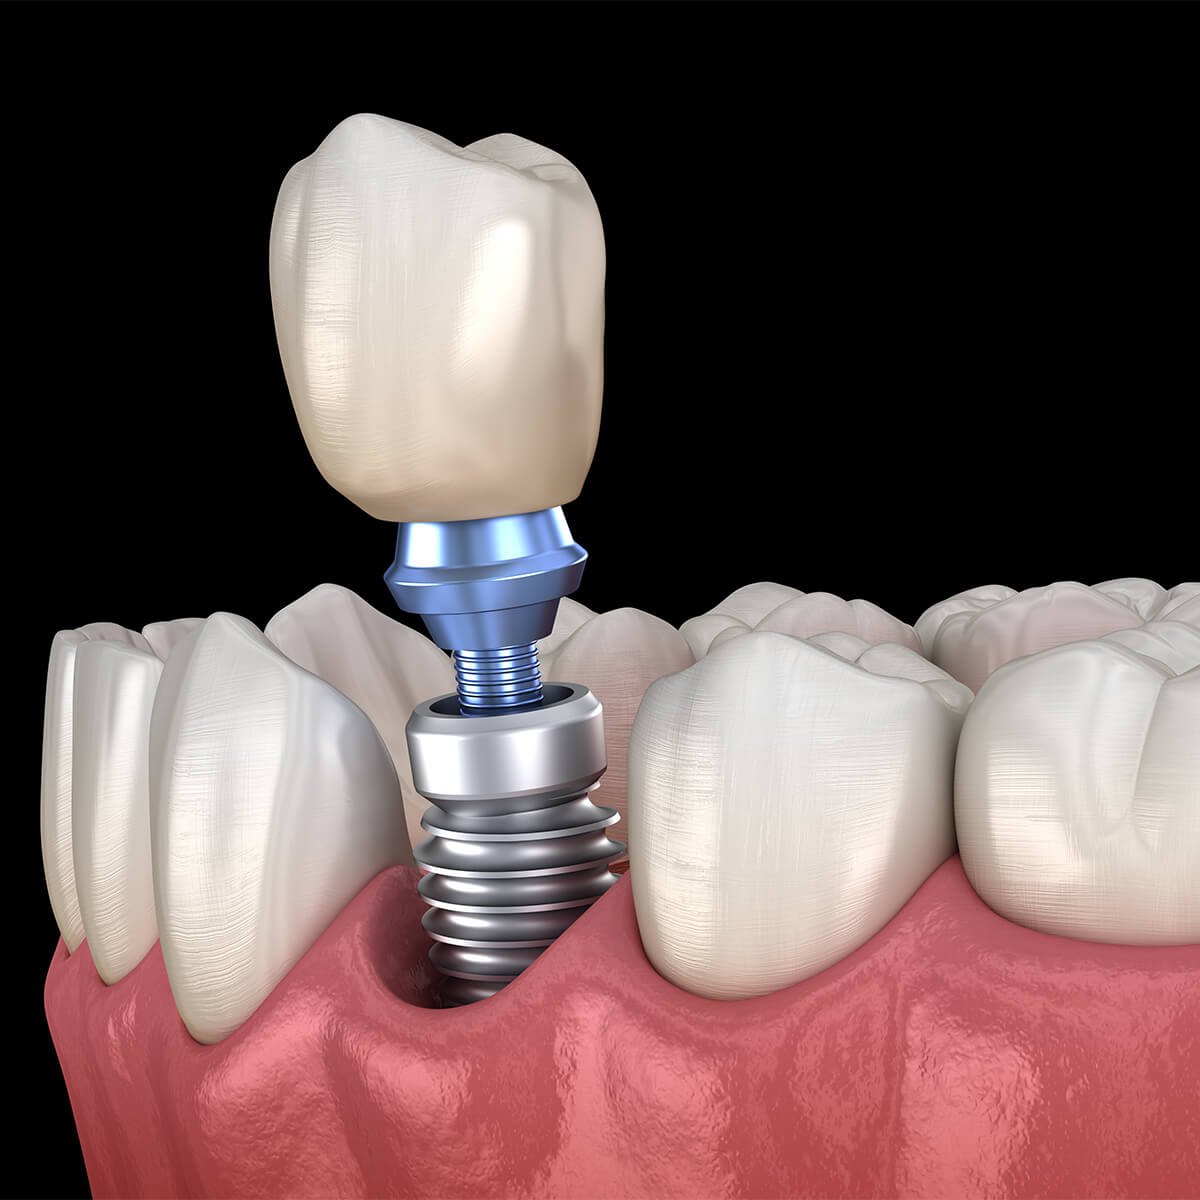 Teeth Implant Service Near Me Knoxville TN Area